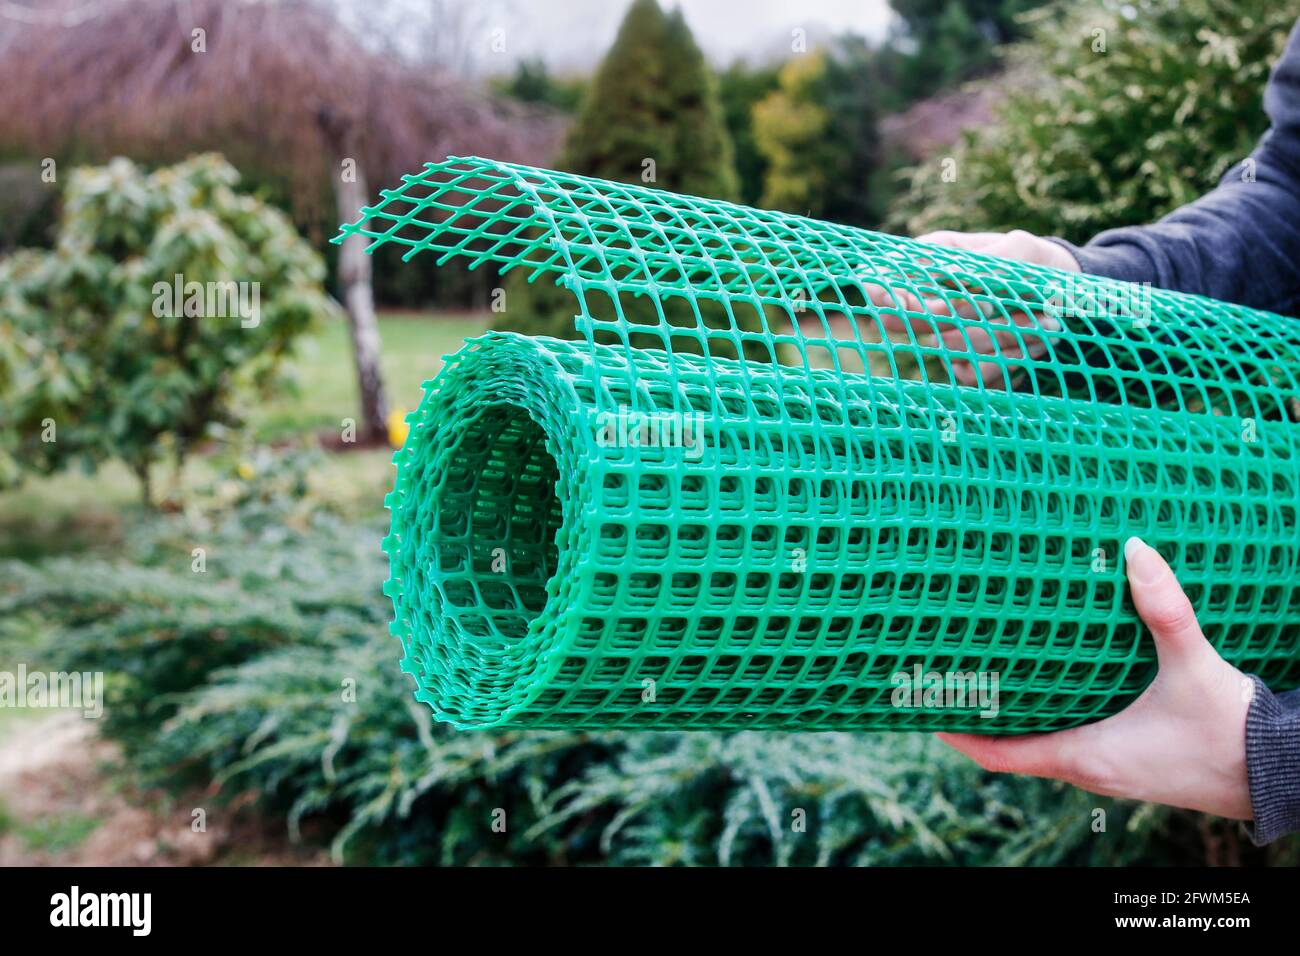 A woman holds a plastic net that is useful in gardening. Garden hobby Stock Photo